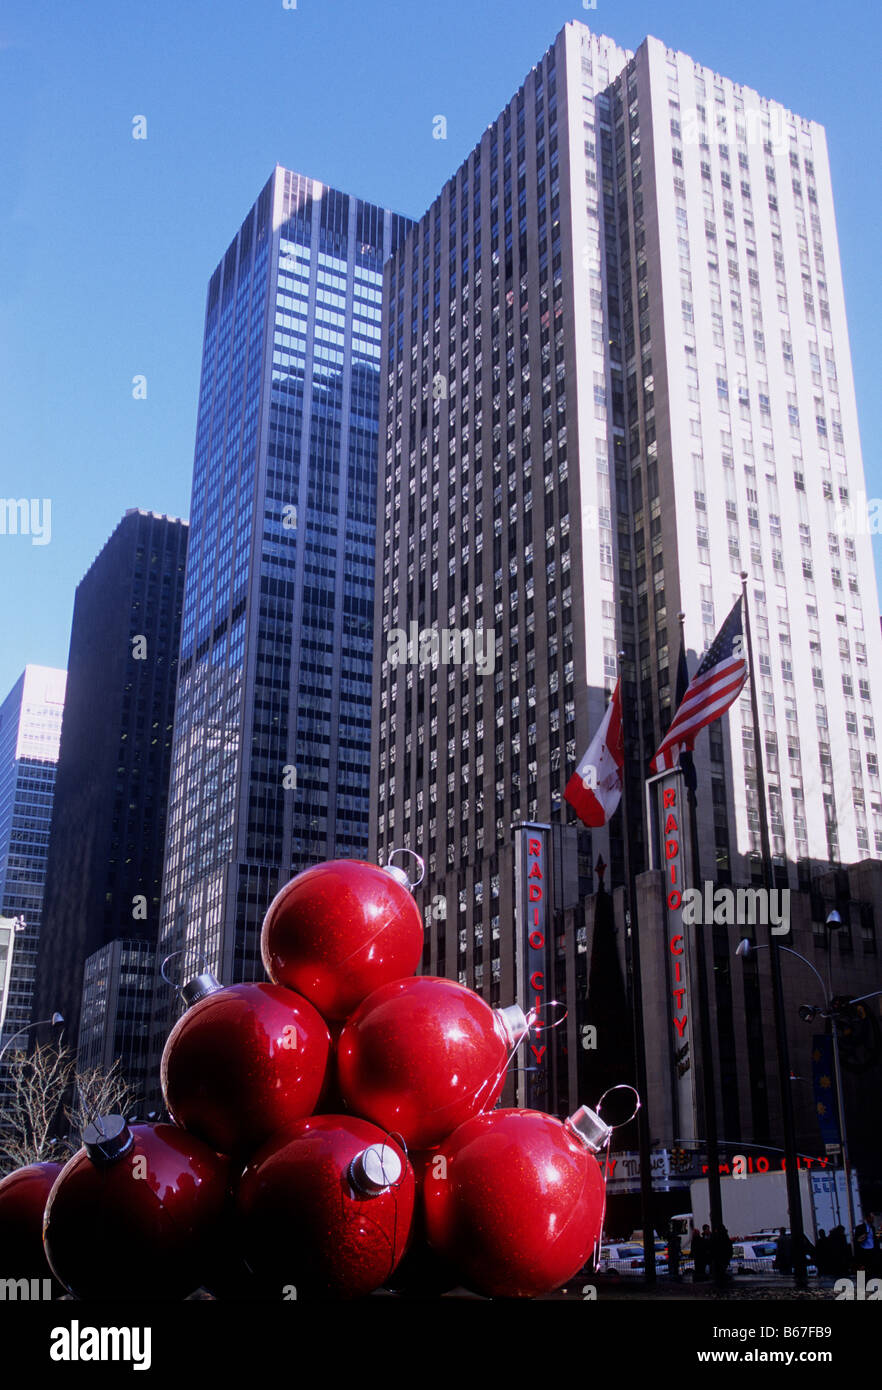 Skyscrapers on Sixth Avenue, (Avenue of the Americas) New York City. Radio City Music Hall. Giant red Christmas decorations on the street. USA Stock Photo